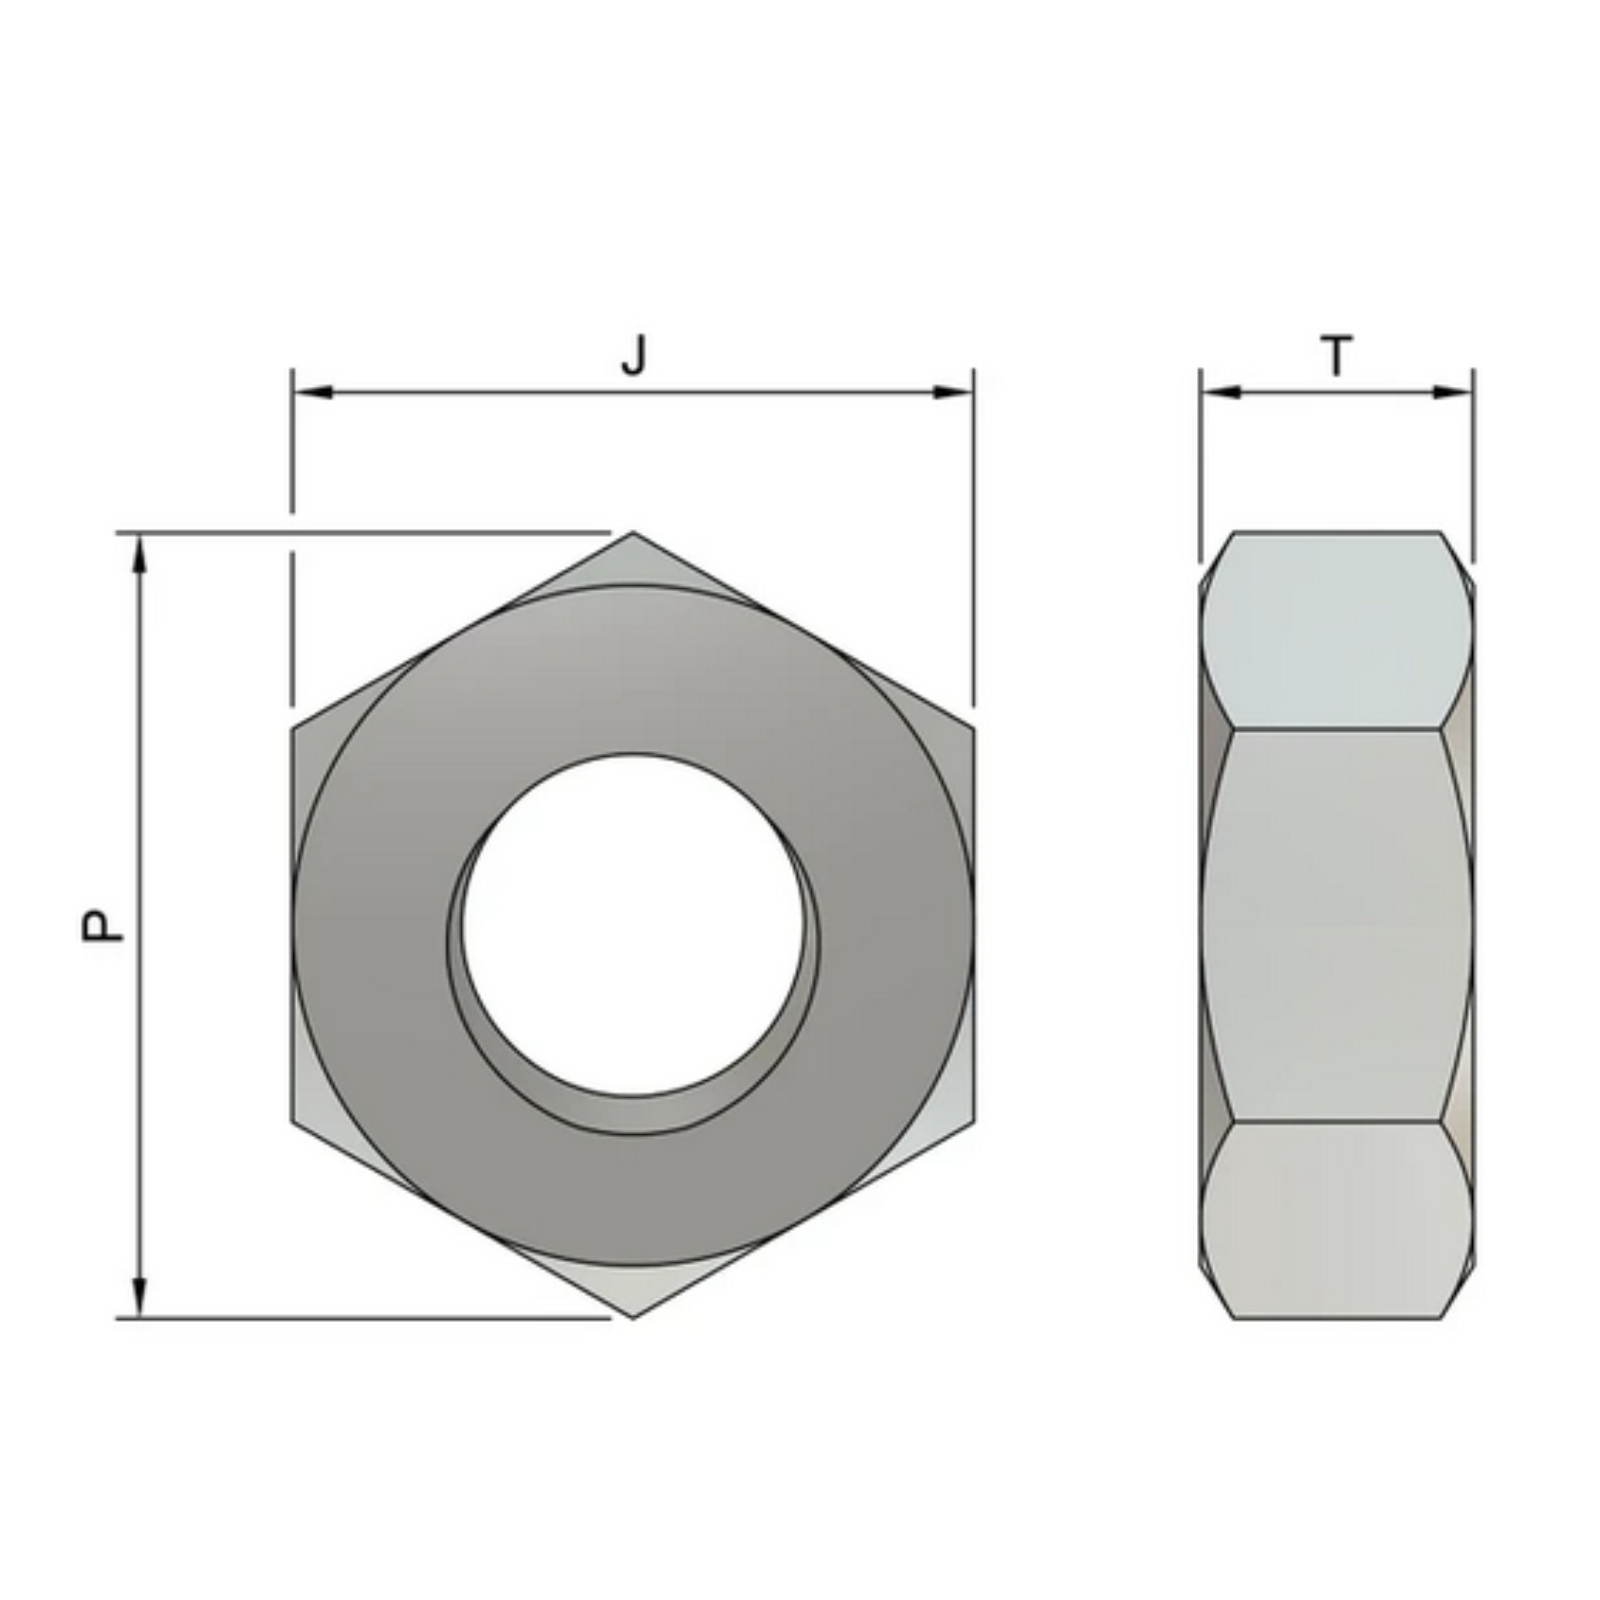 M10 (1.25mm Fine Pitch) Hexagon Nuts (DIN 934) - Stainless Steel (A2)